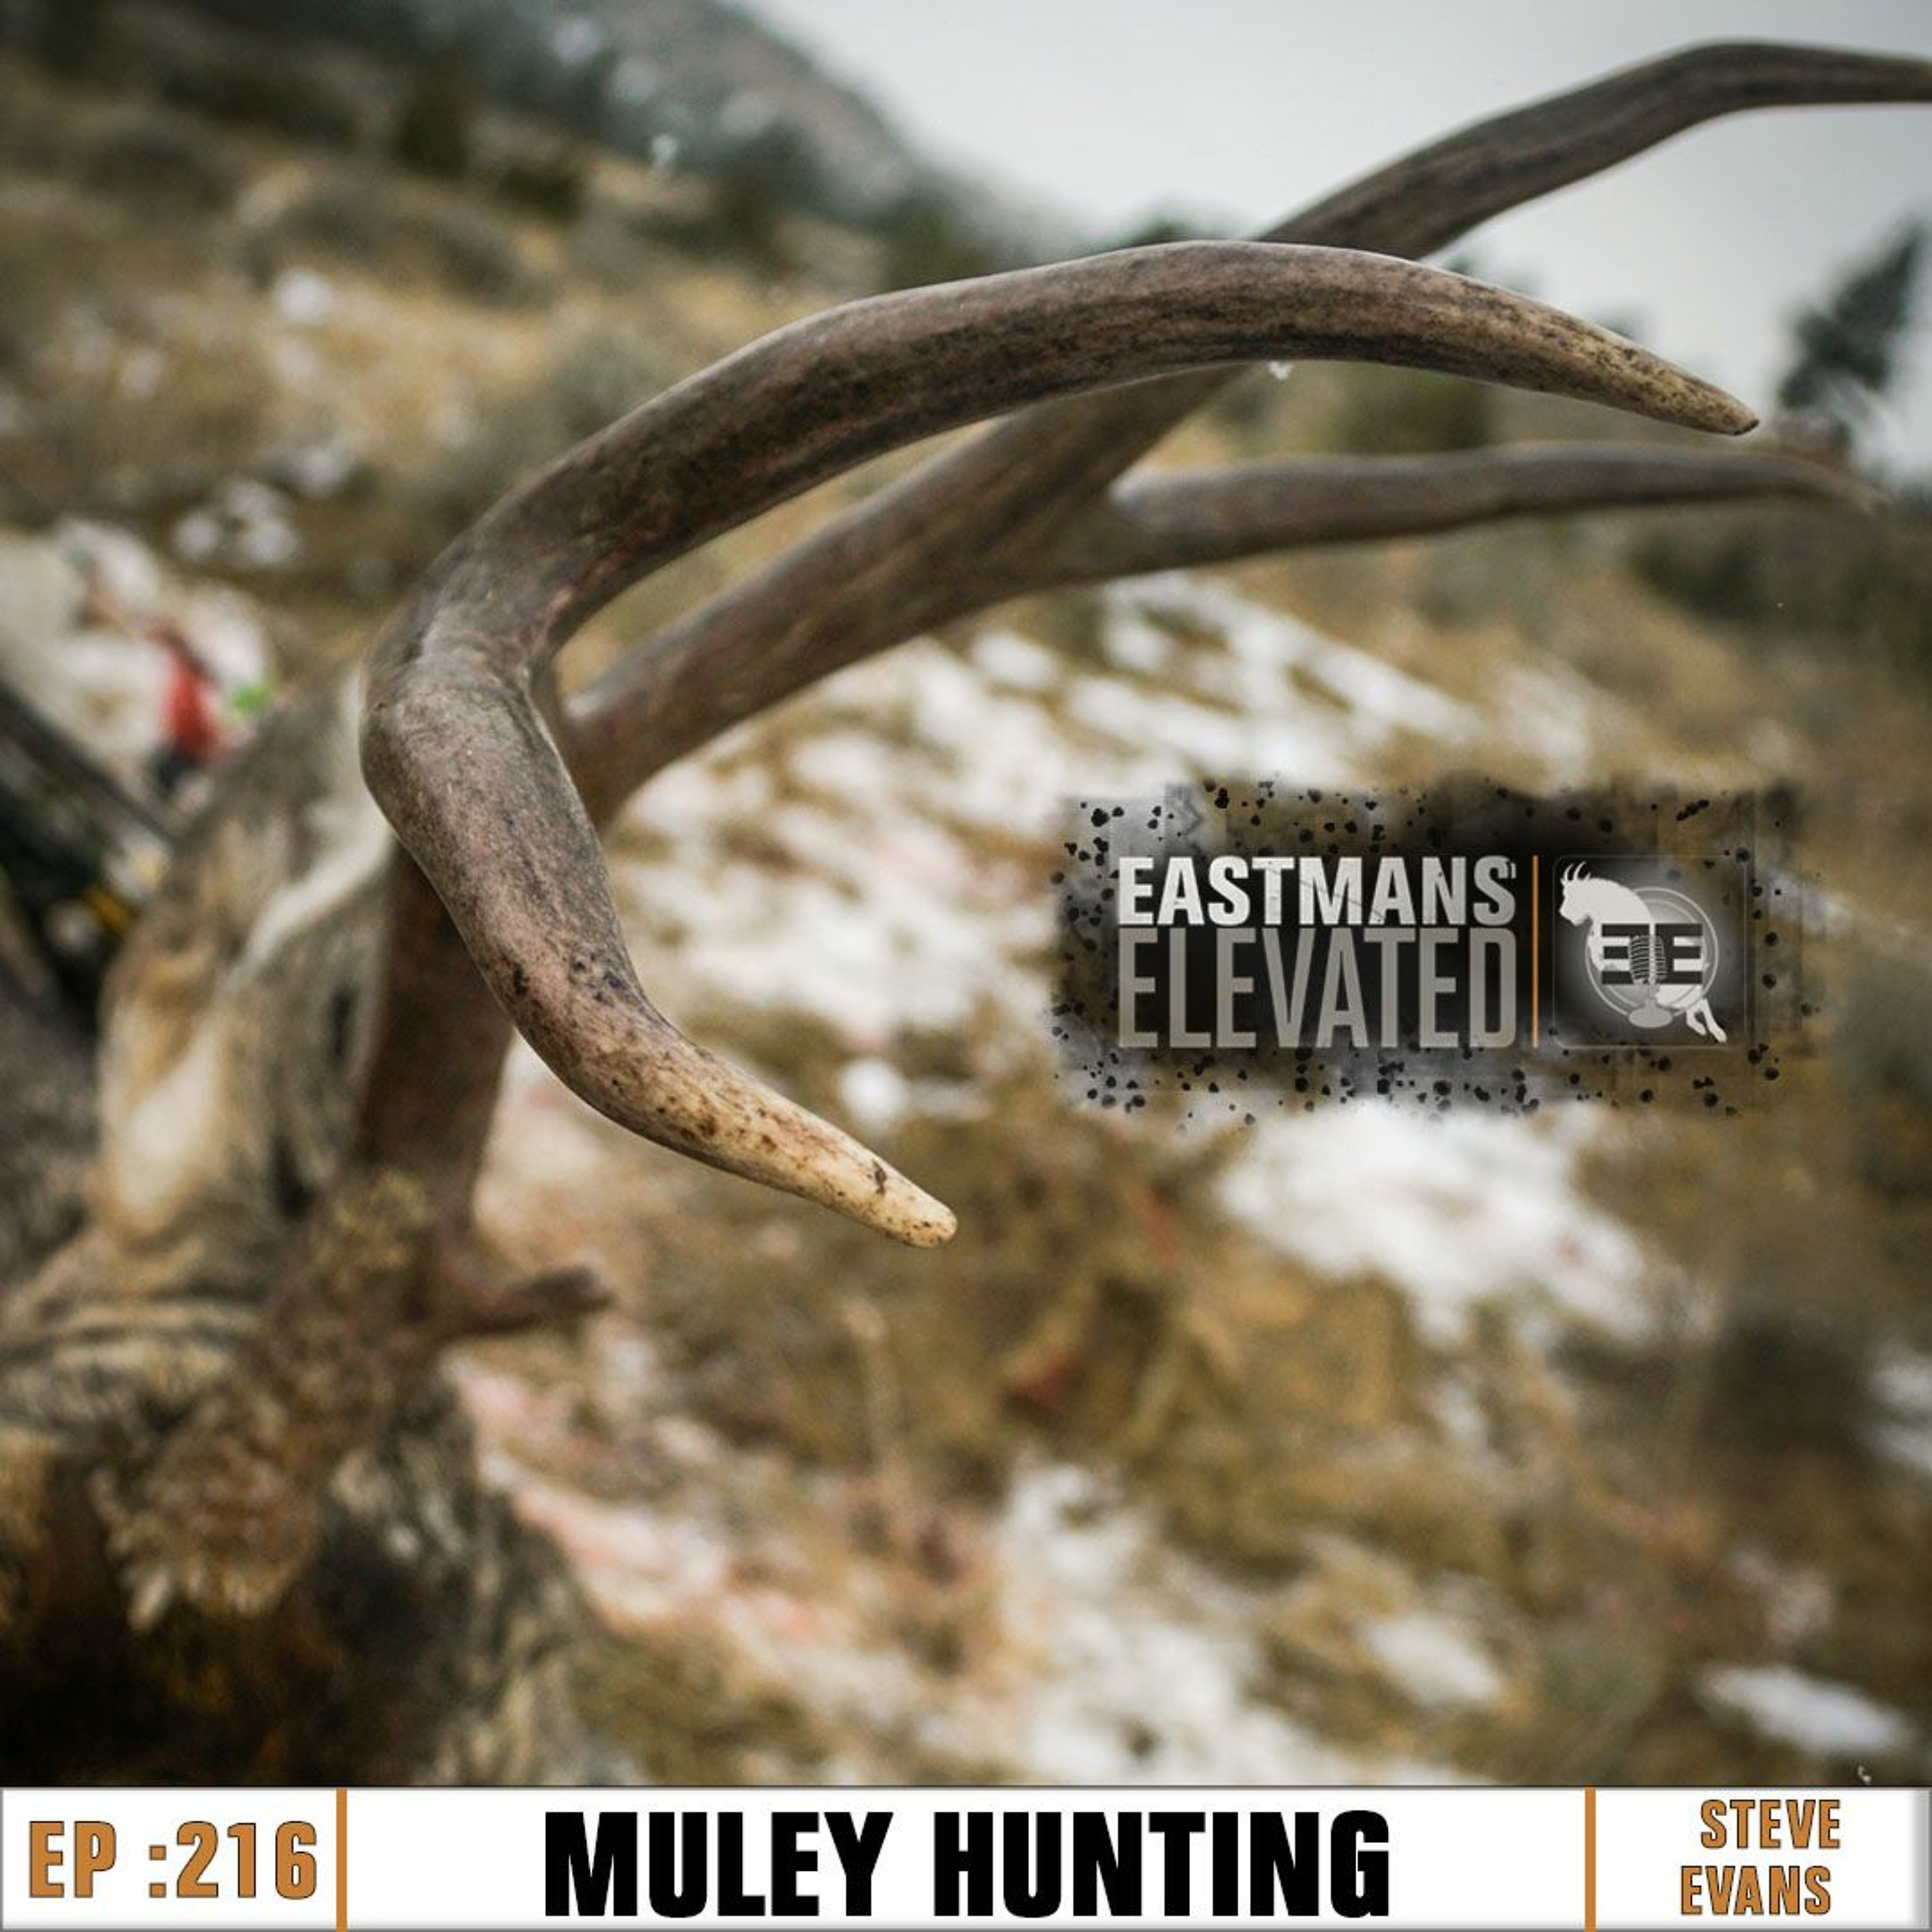 Episode 216: Muley Hunting with Steve Evans